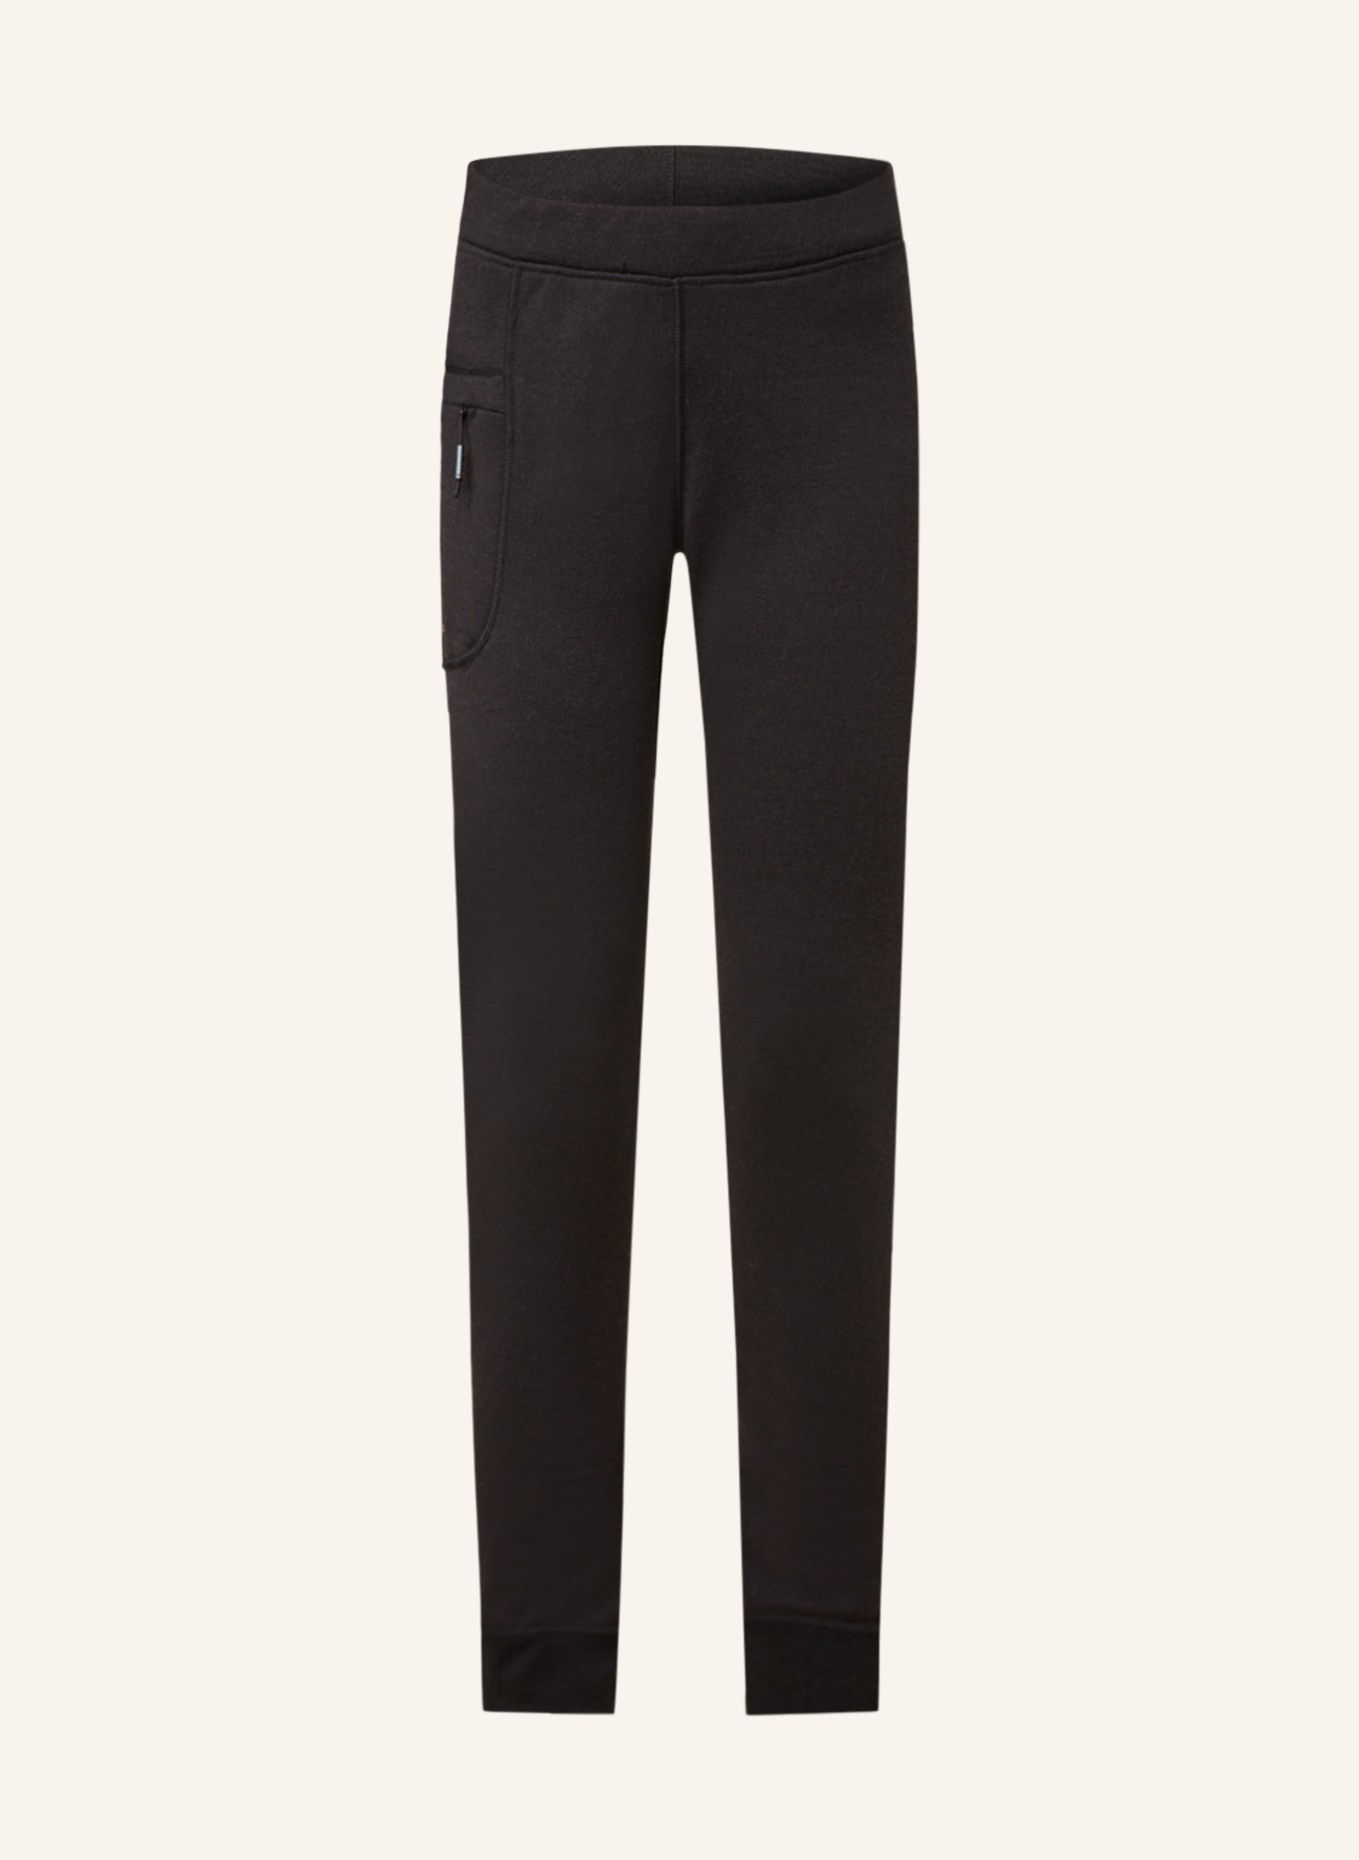 DEVOLD Functional baselayer trousers NIBBA made of merino wool, Color: BLACK (Image 1)